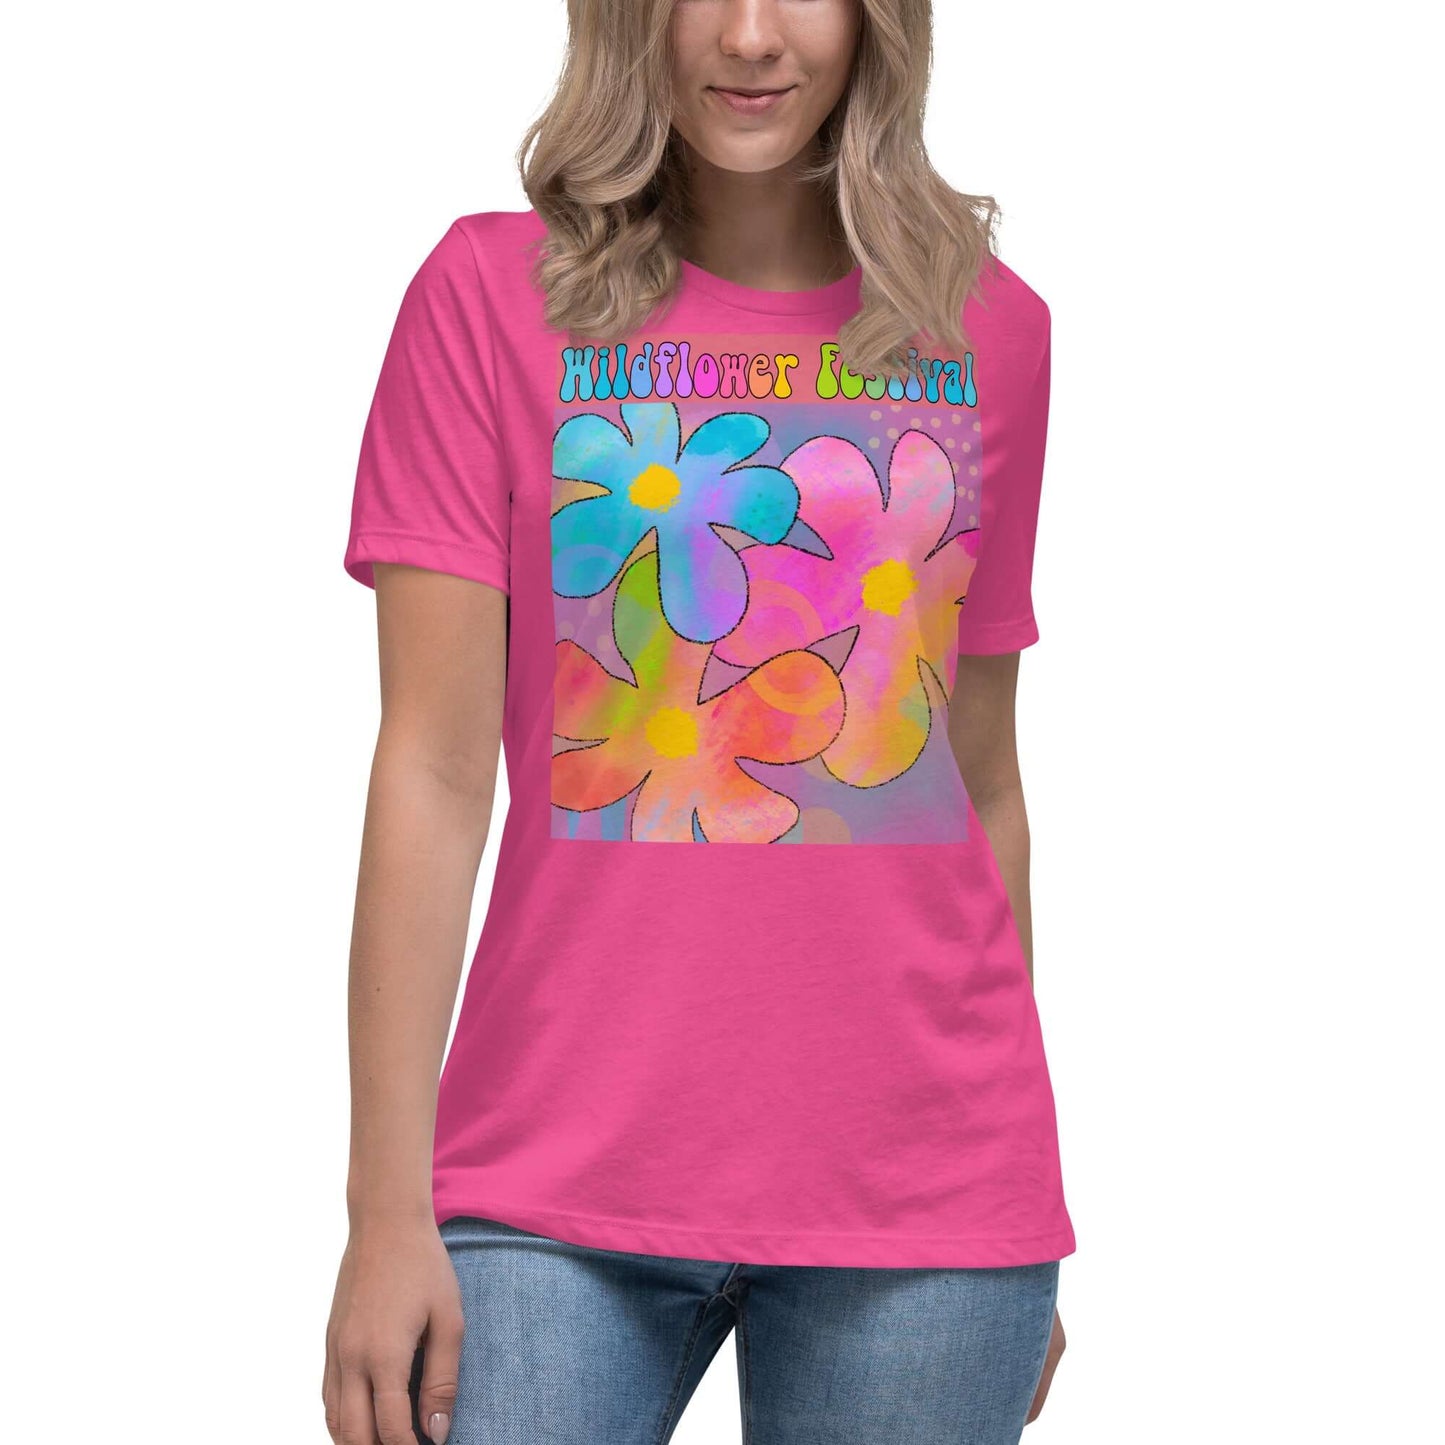 Big Colorful Hippie 1960s Psychedelic Flowers with Text “Wildflower Festival” Women’s Short Sleeve Tee in Berry